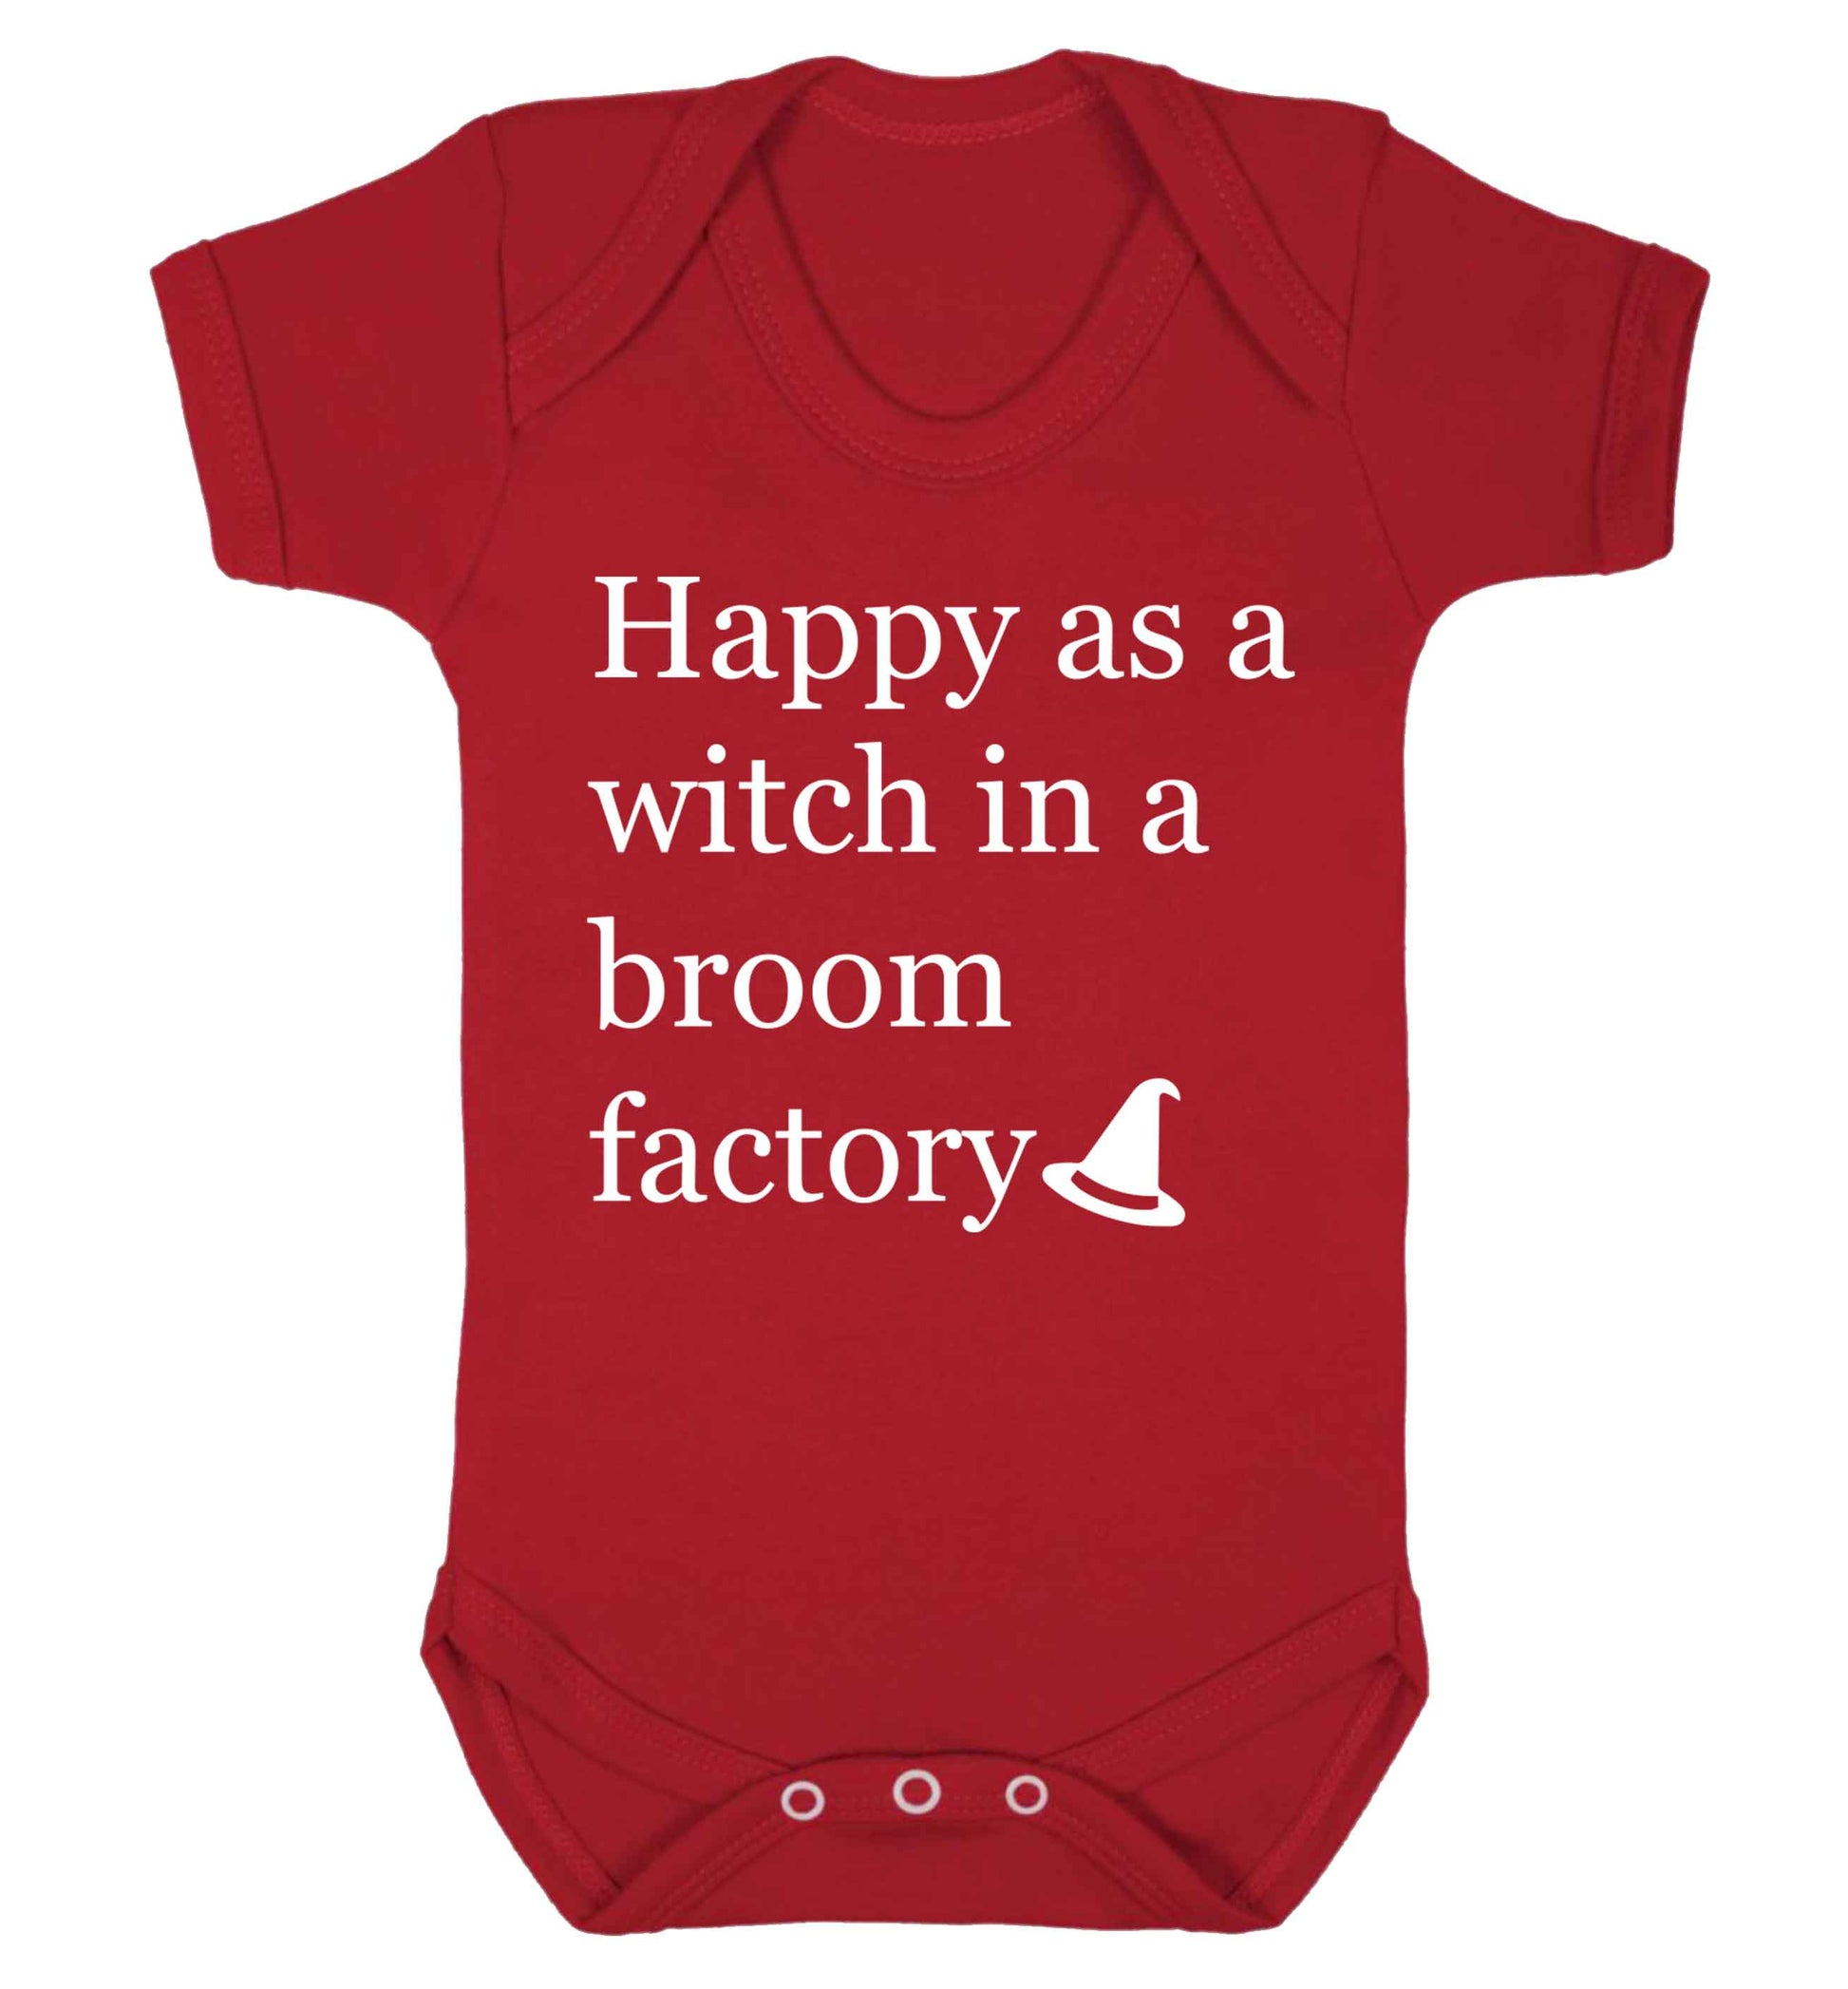 Happy as a witch in a broom factory Baby Vest red 18-24 months